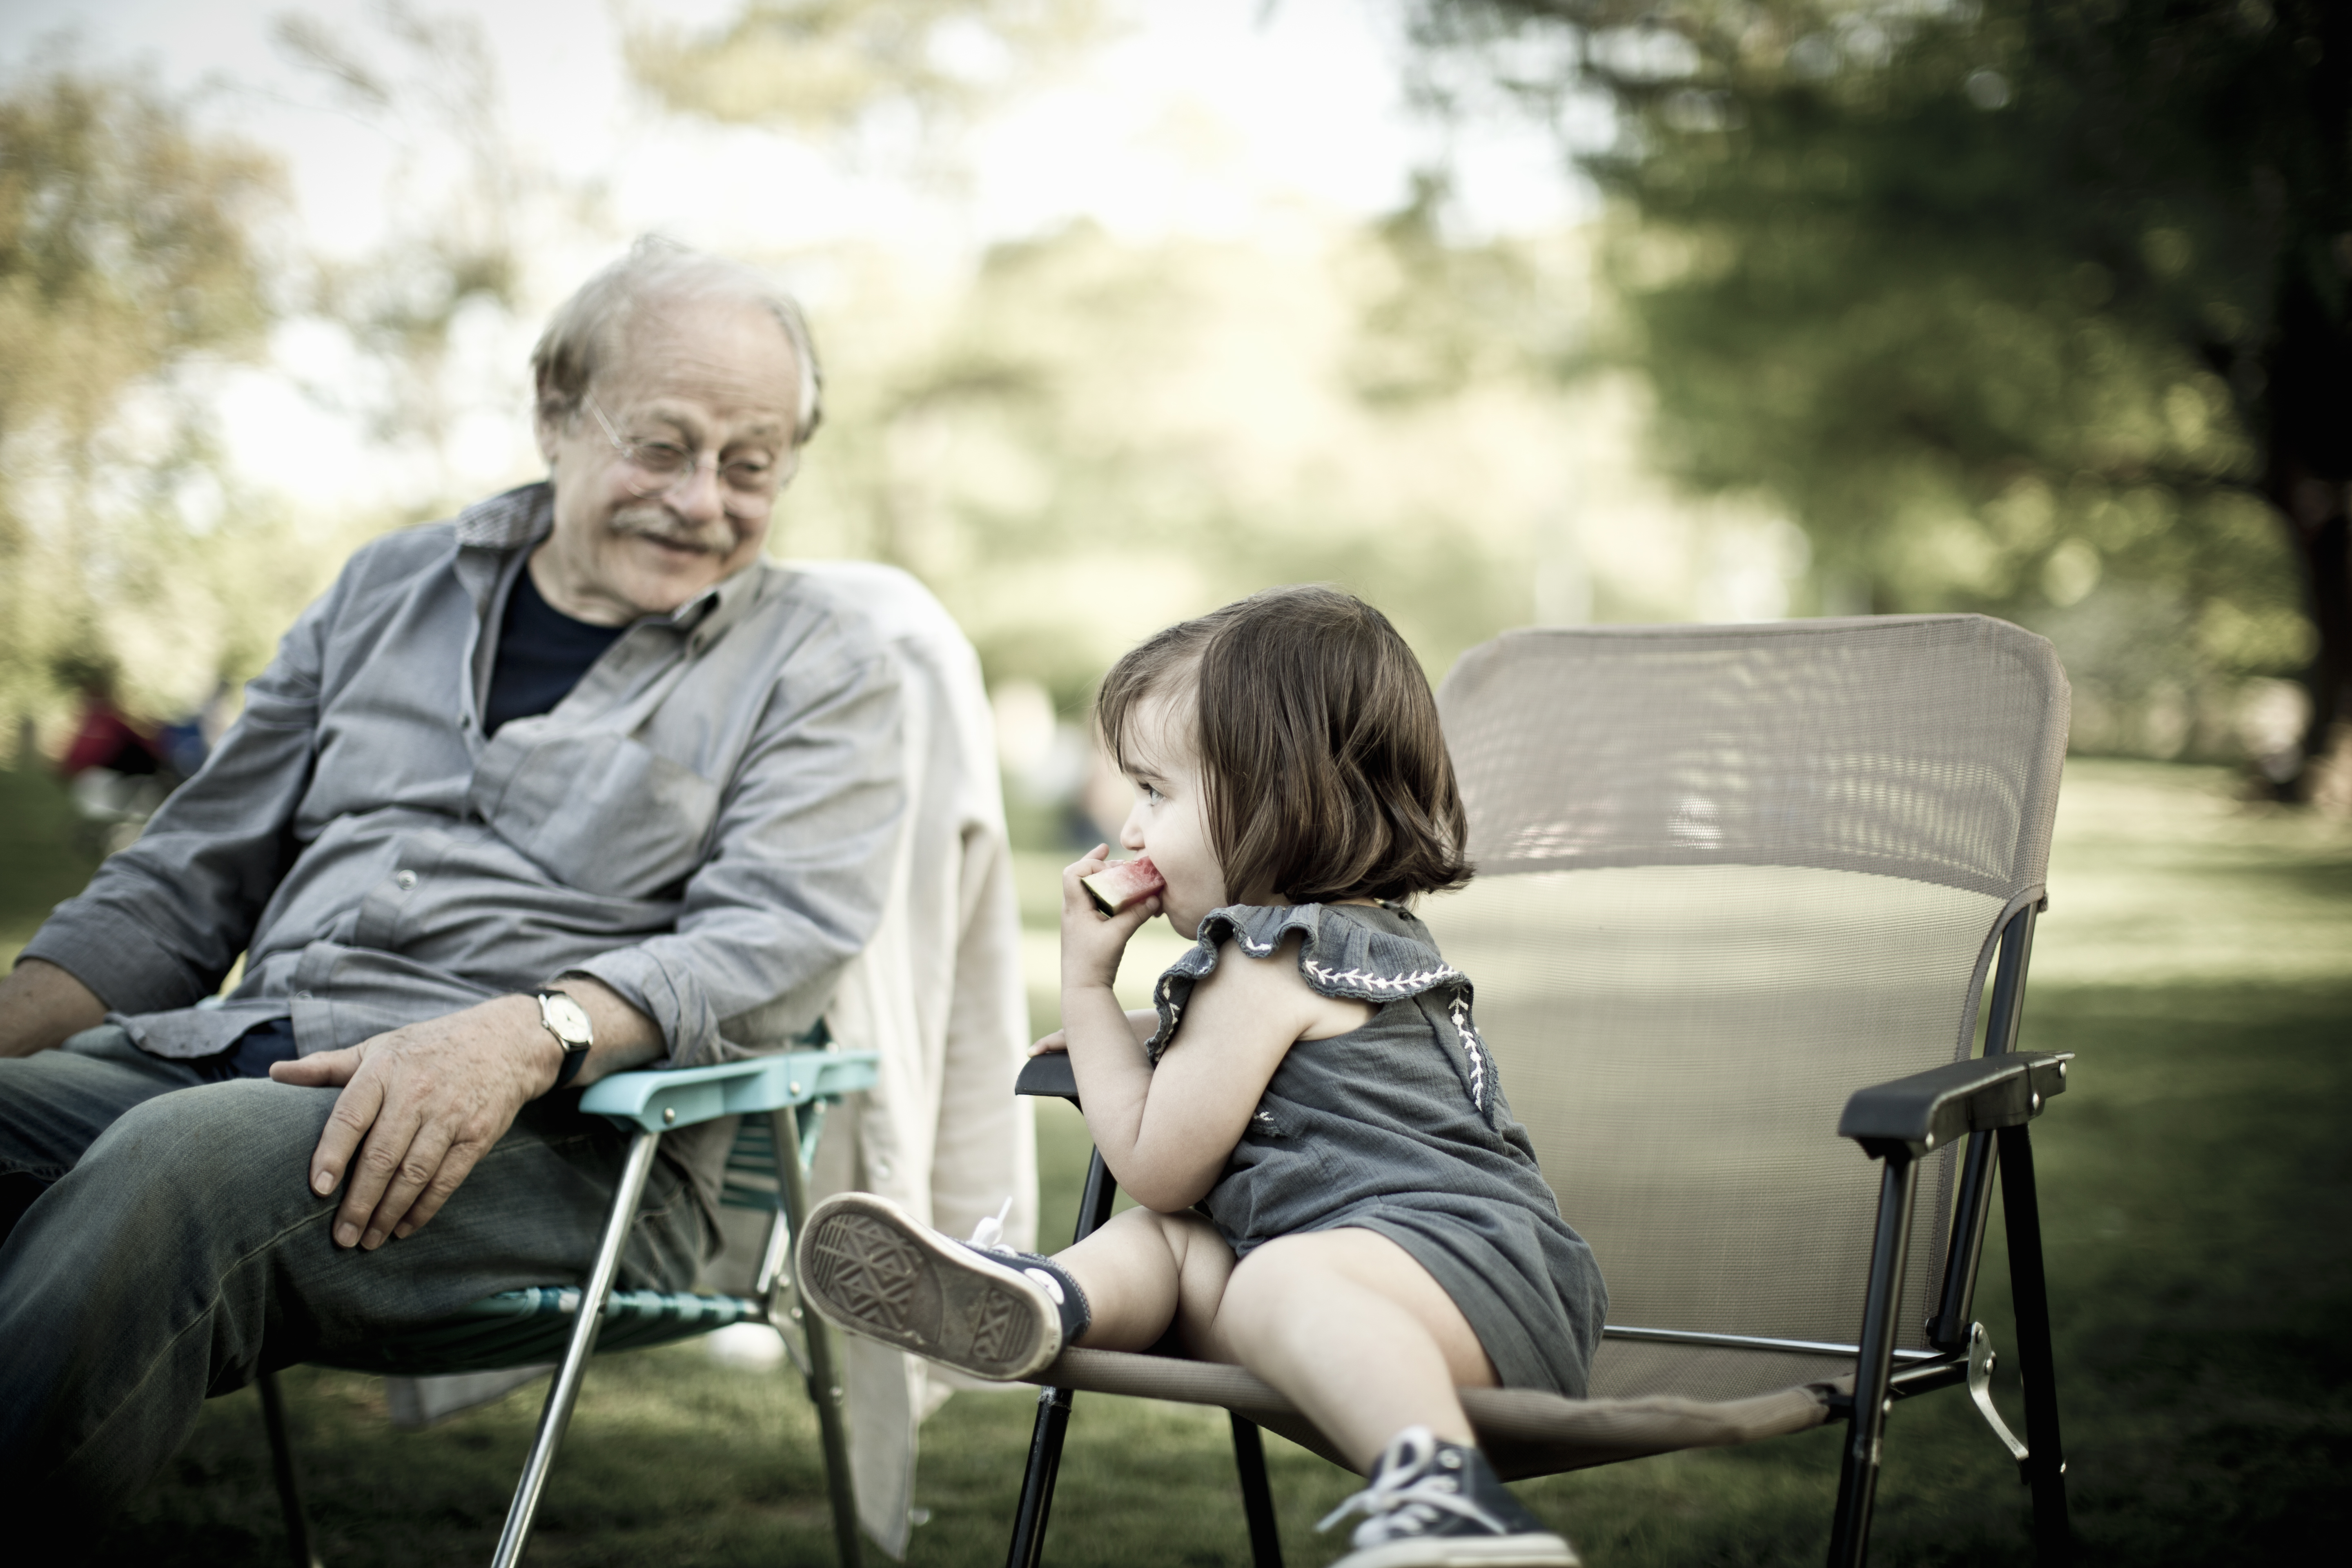 An elderly man sitting with a child at a park.